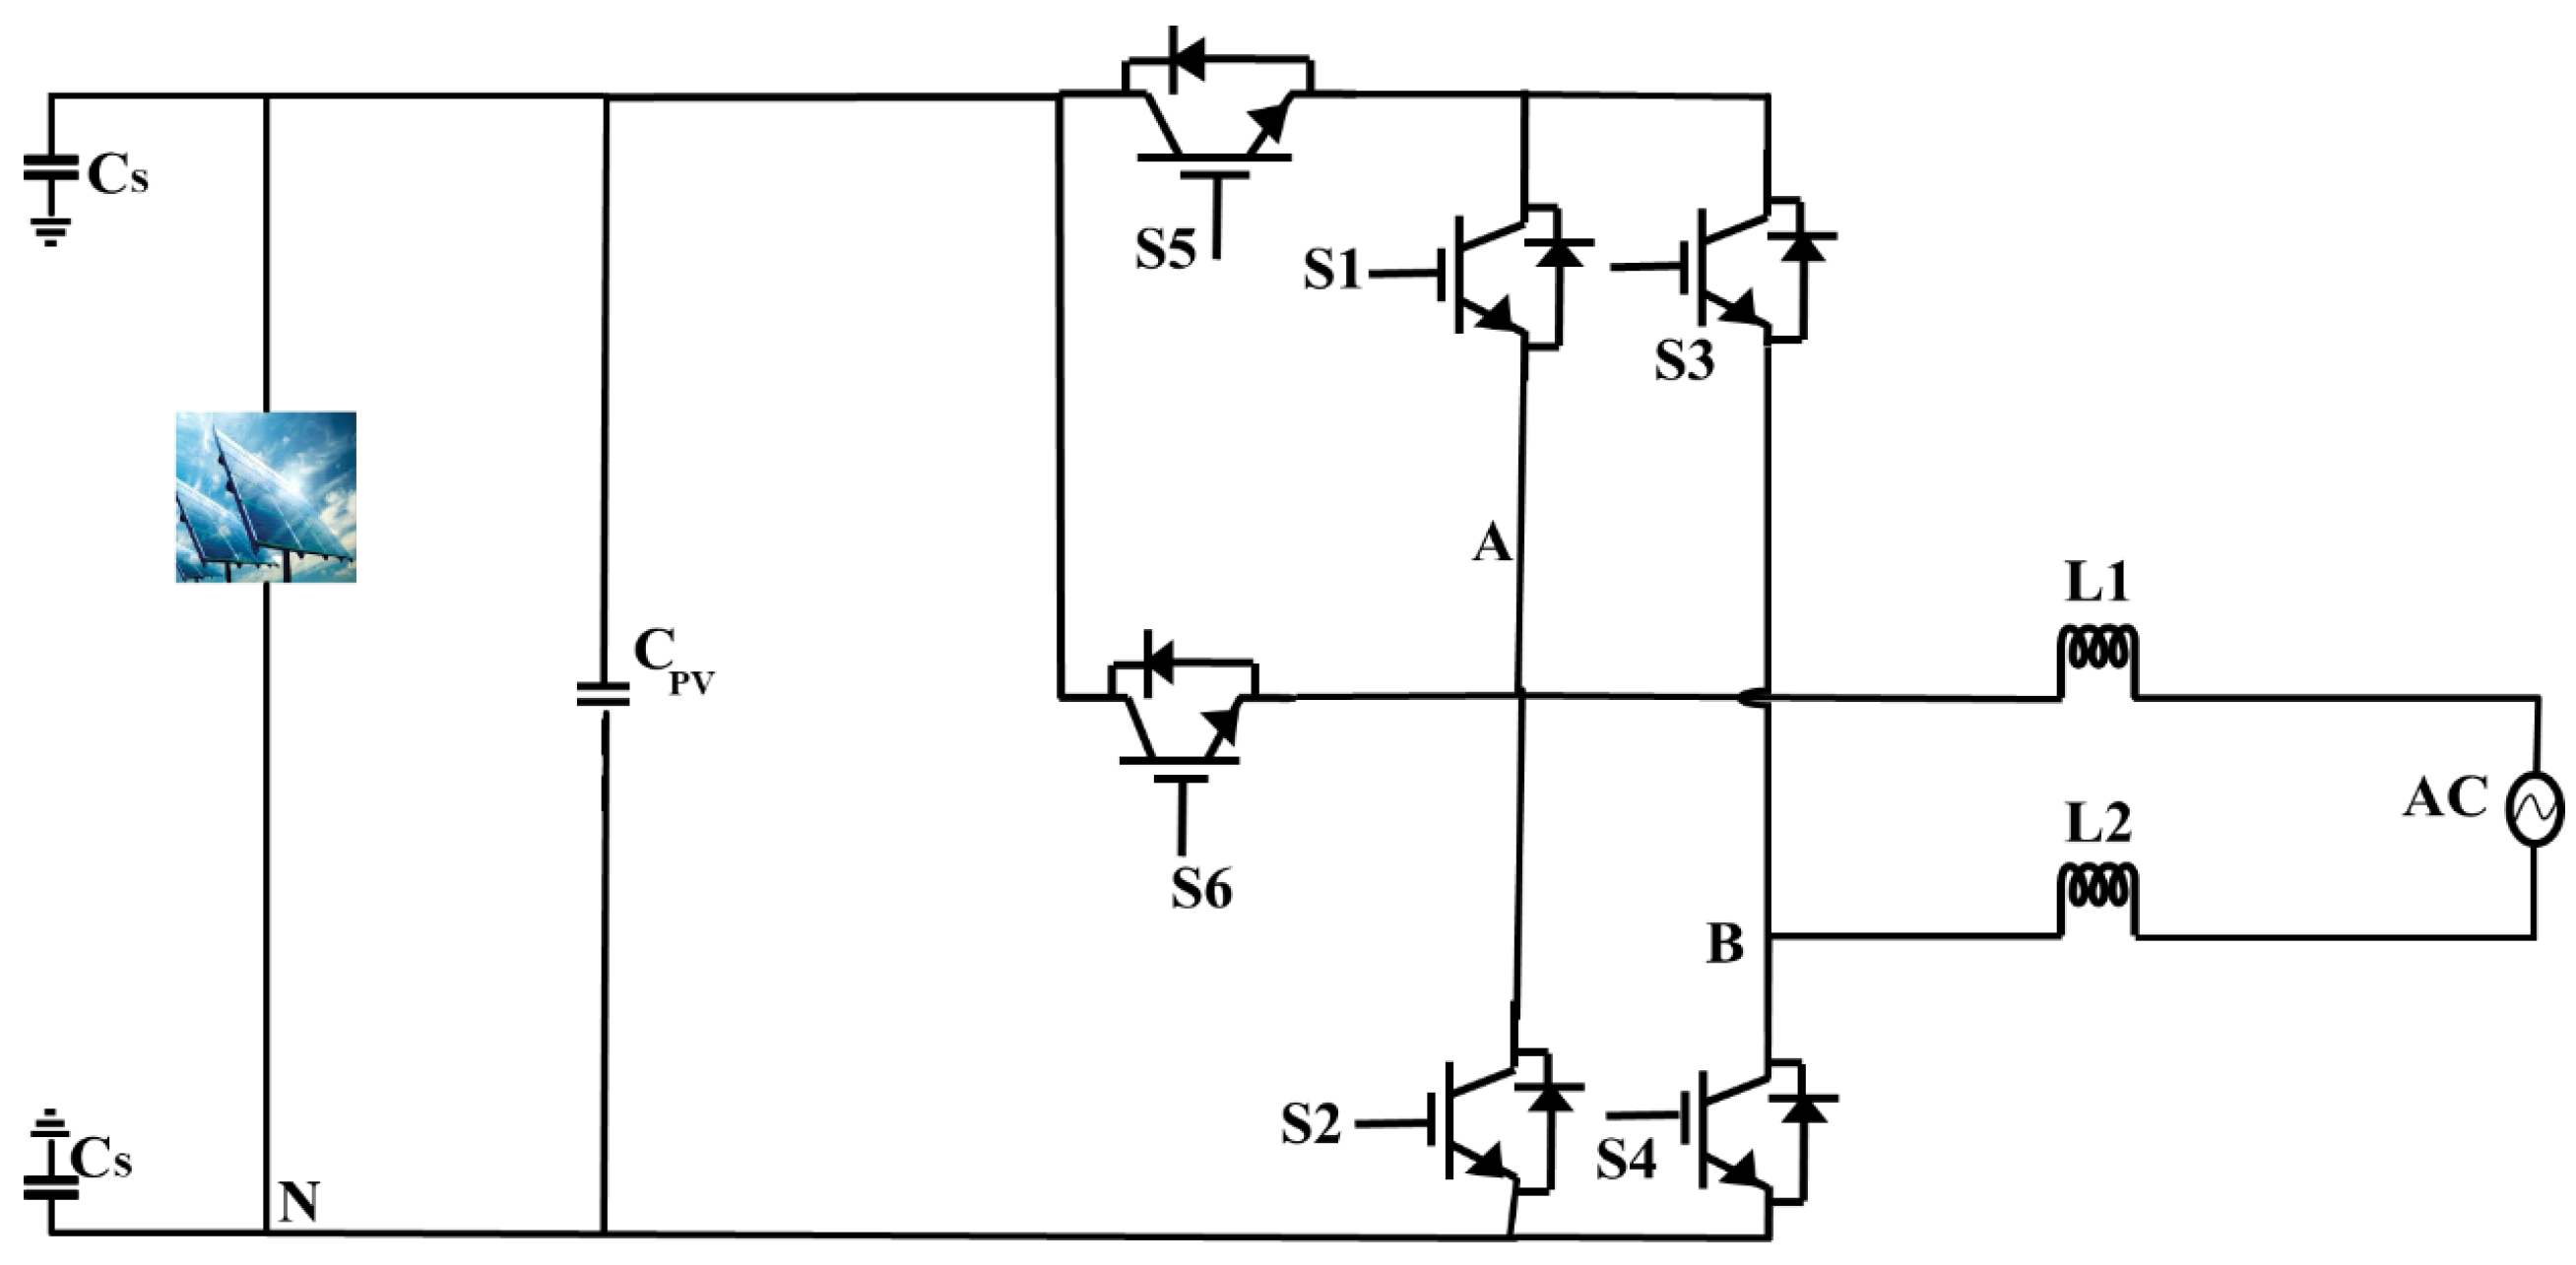 JLPEA | Free Full-Text | An Improved Proposed Single Phase Transformerless  Inverter with Leakage Current Elimination and Reactive Power Capability for  PV Systems Application | HTML